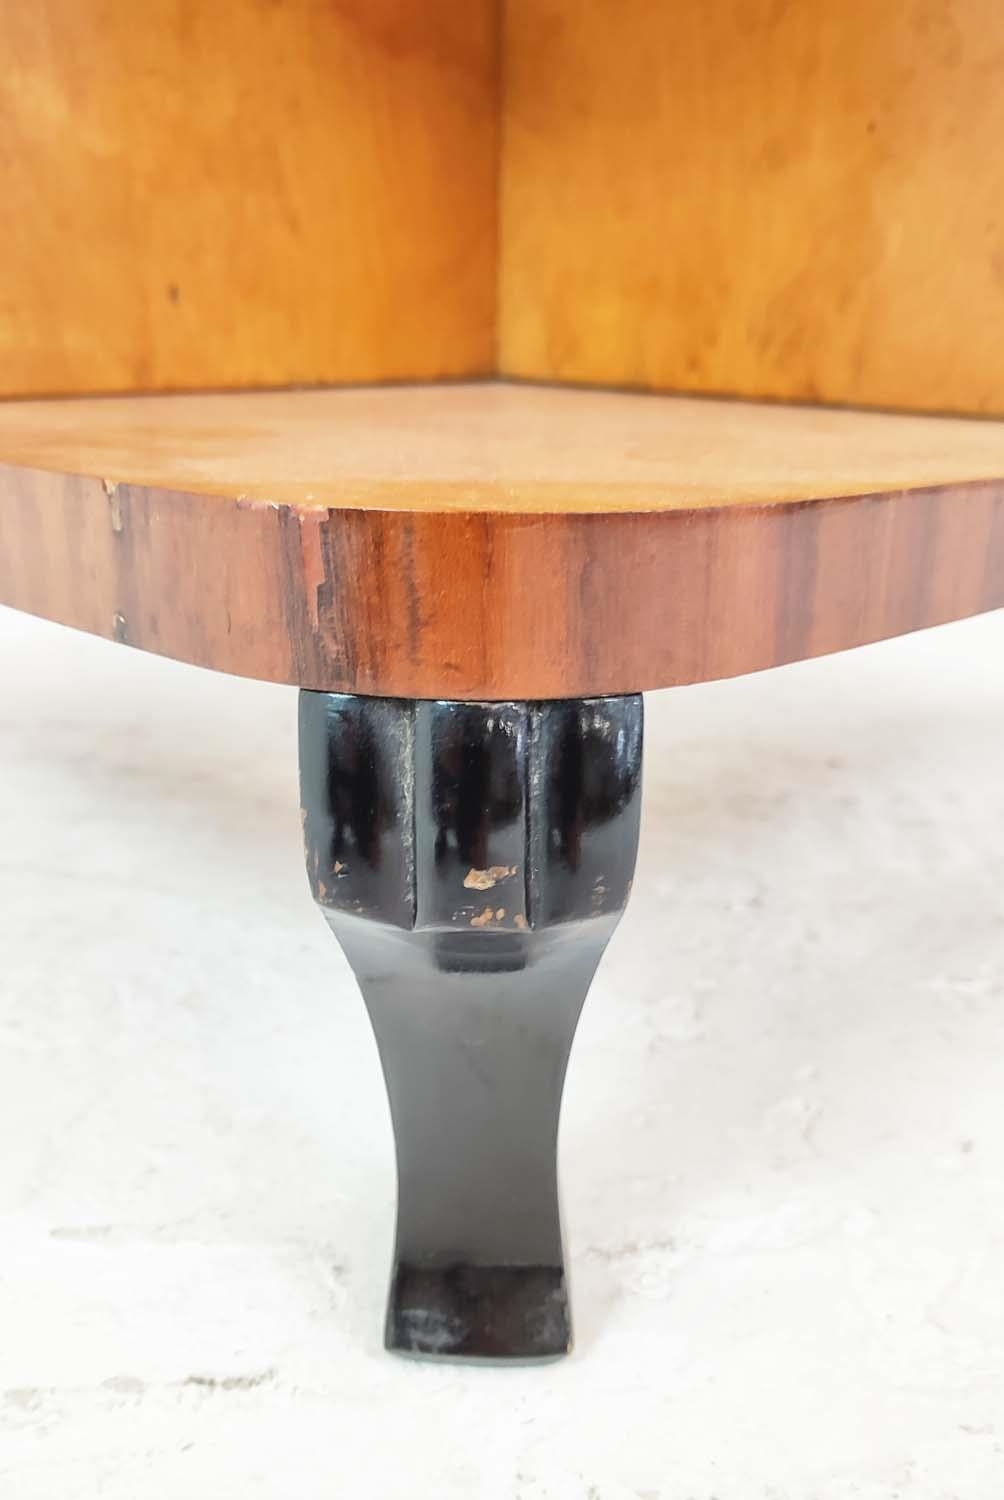 ART DECO CENTRE TABLE, Swedish 1930's, maple, ash, marquetry and ebonised detail with two opposing - Image 4 of 7